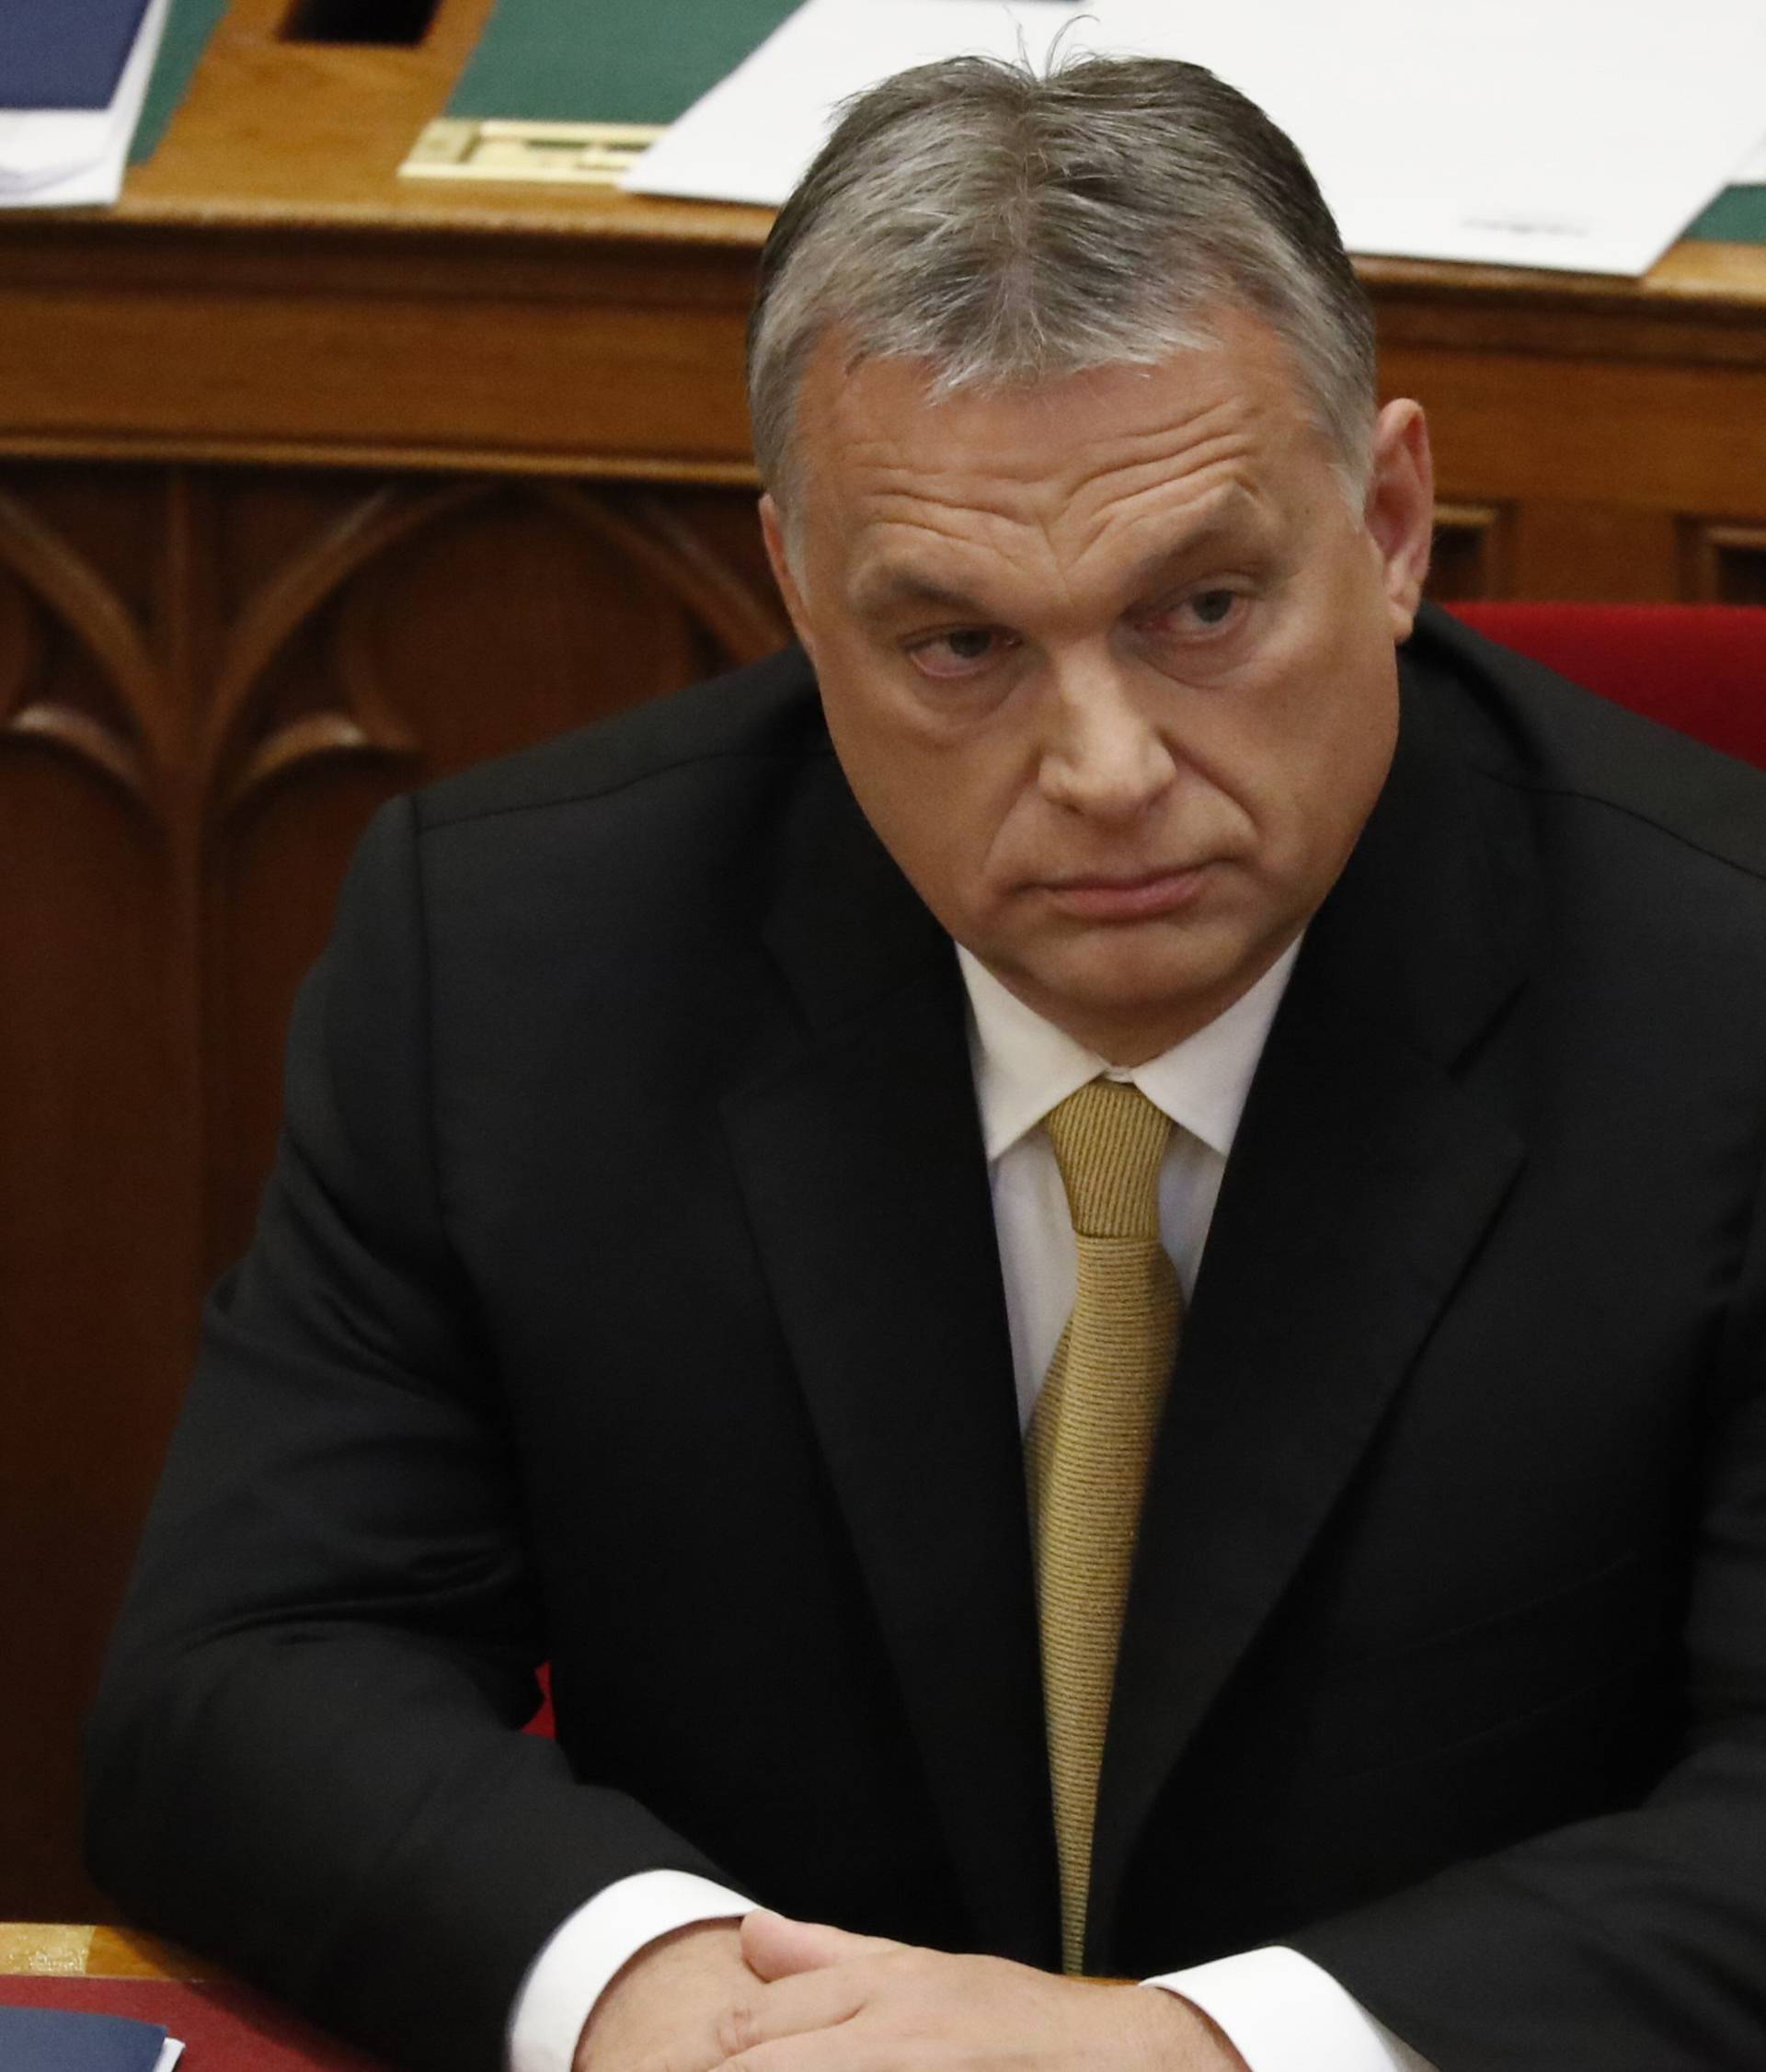 Hungarian Prime Minister Orban looks on before taking the oath of office in Parliament in Budapest